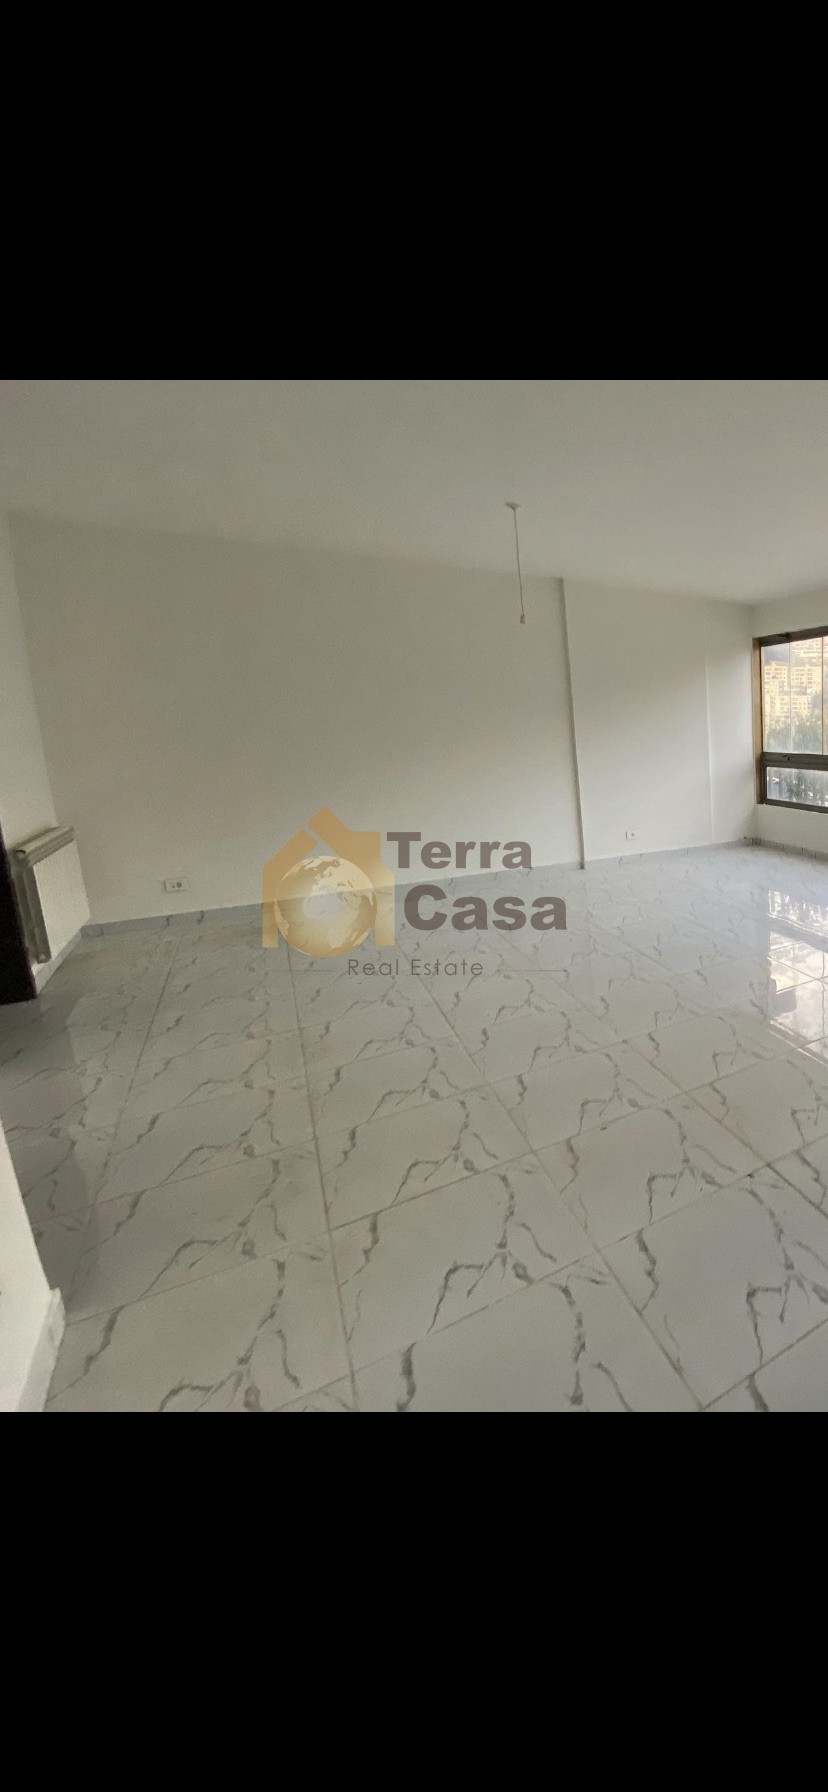 Amazing apartment in hazmieh with terrace and a very comfortable location